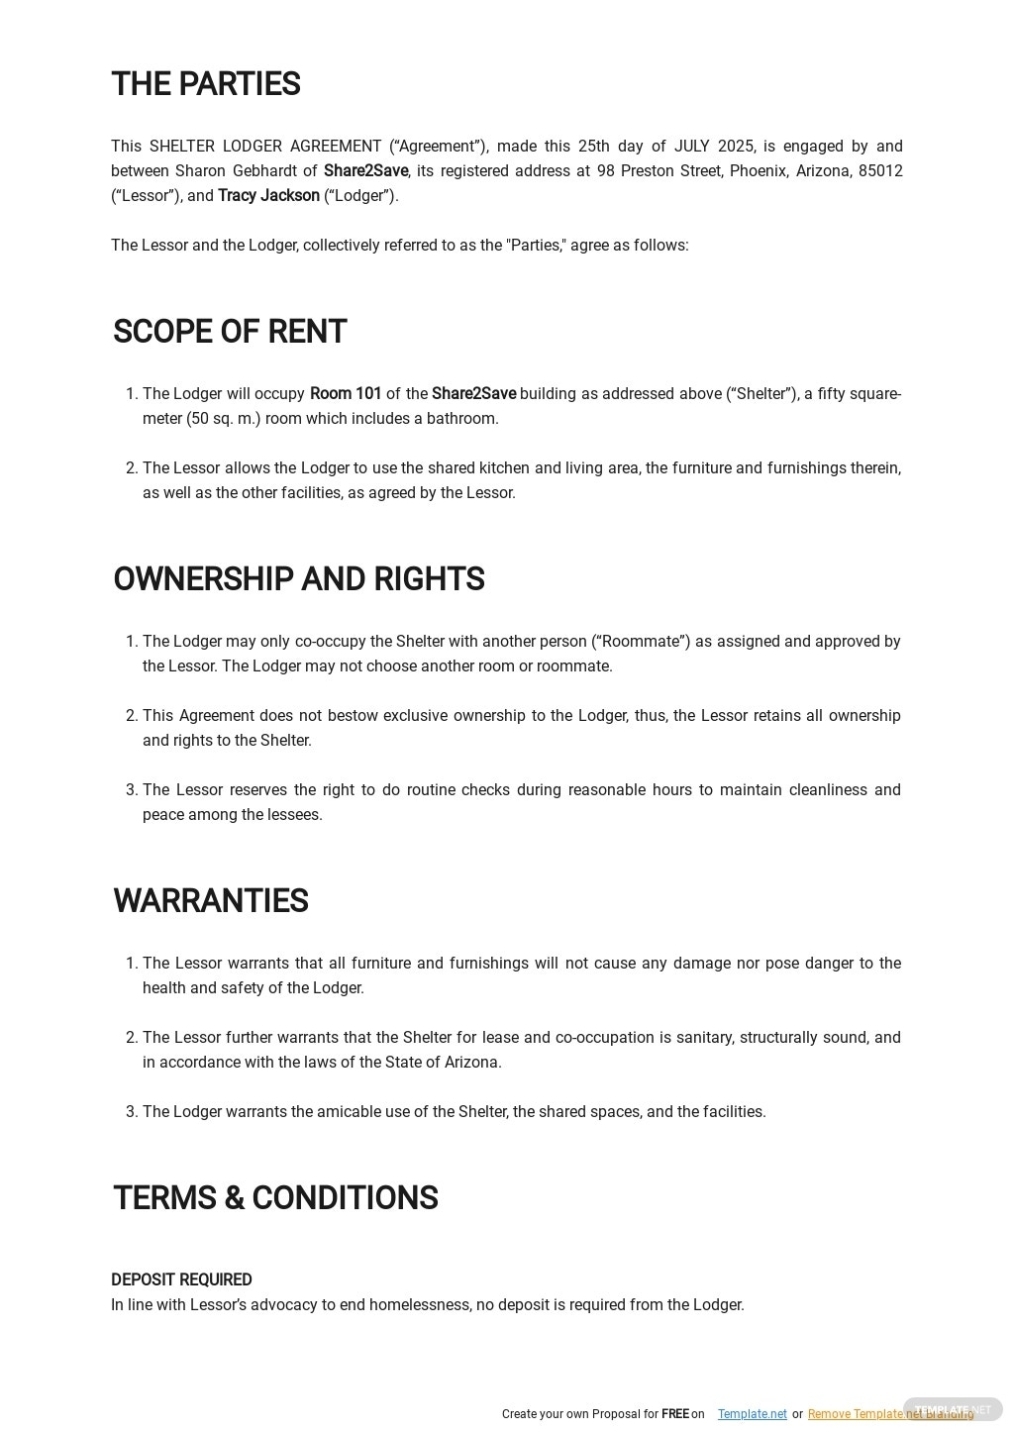 Shelter Lodger Agreement Template In | Template Intended For Shelter Lodger Agreement Template